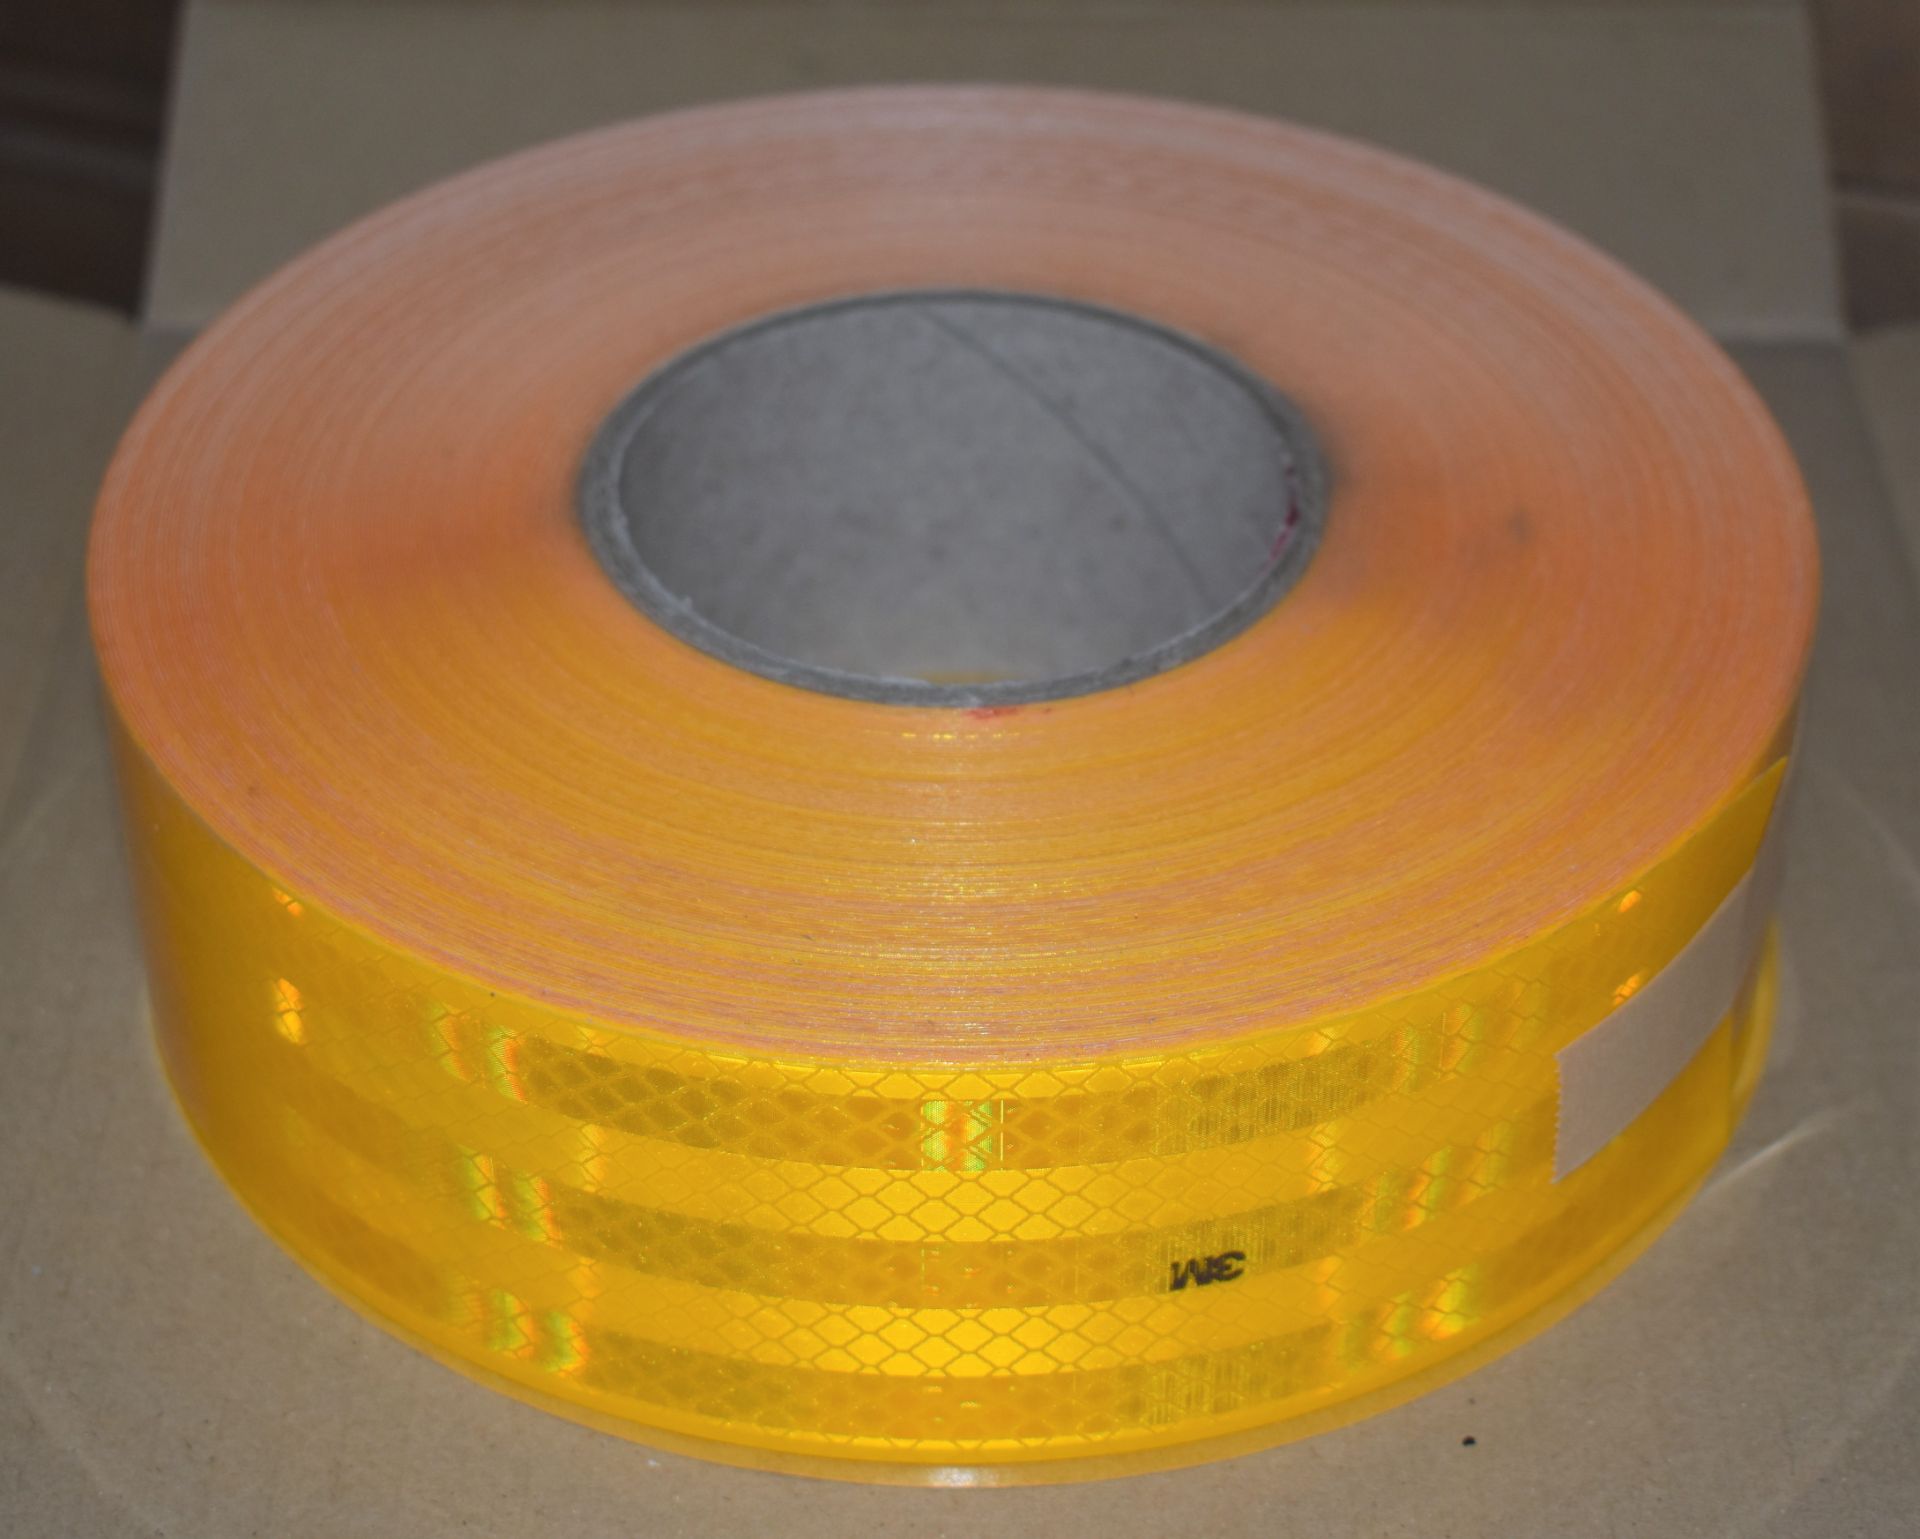 1 x Roll of 3M Conspicuity Tape Reflective Sheeting - Size 55mm x 50m - Diamond Grade - Colour - Image 2 of 4